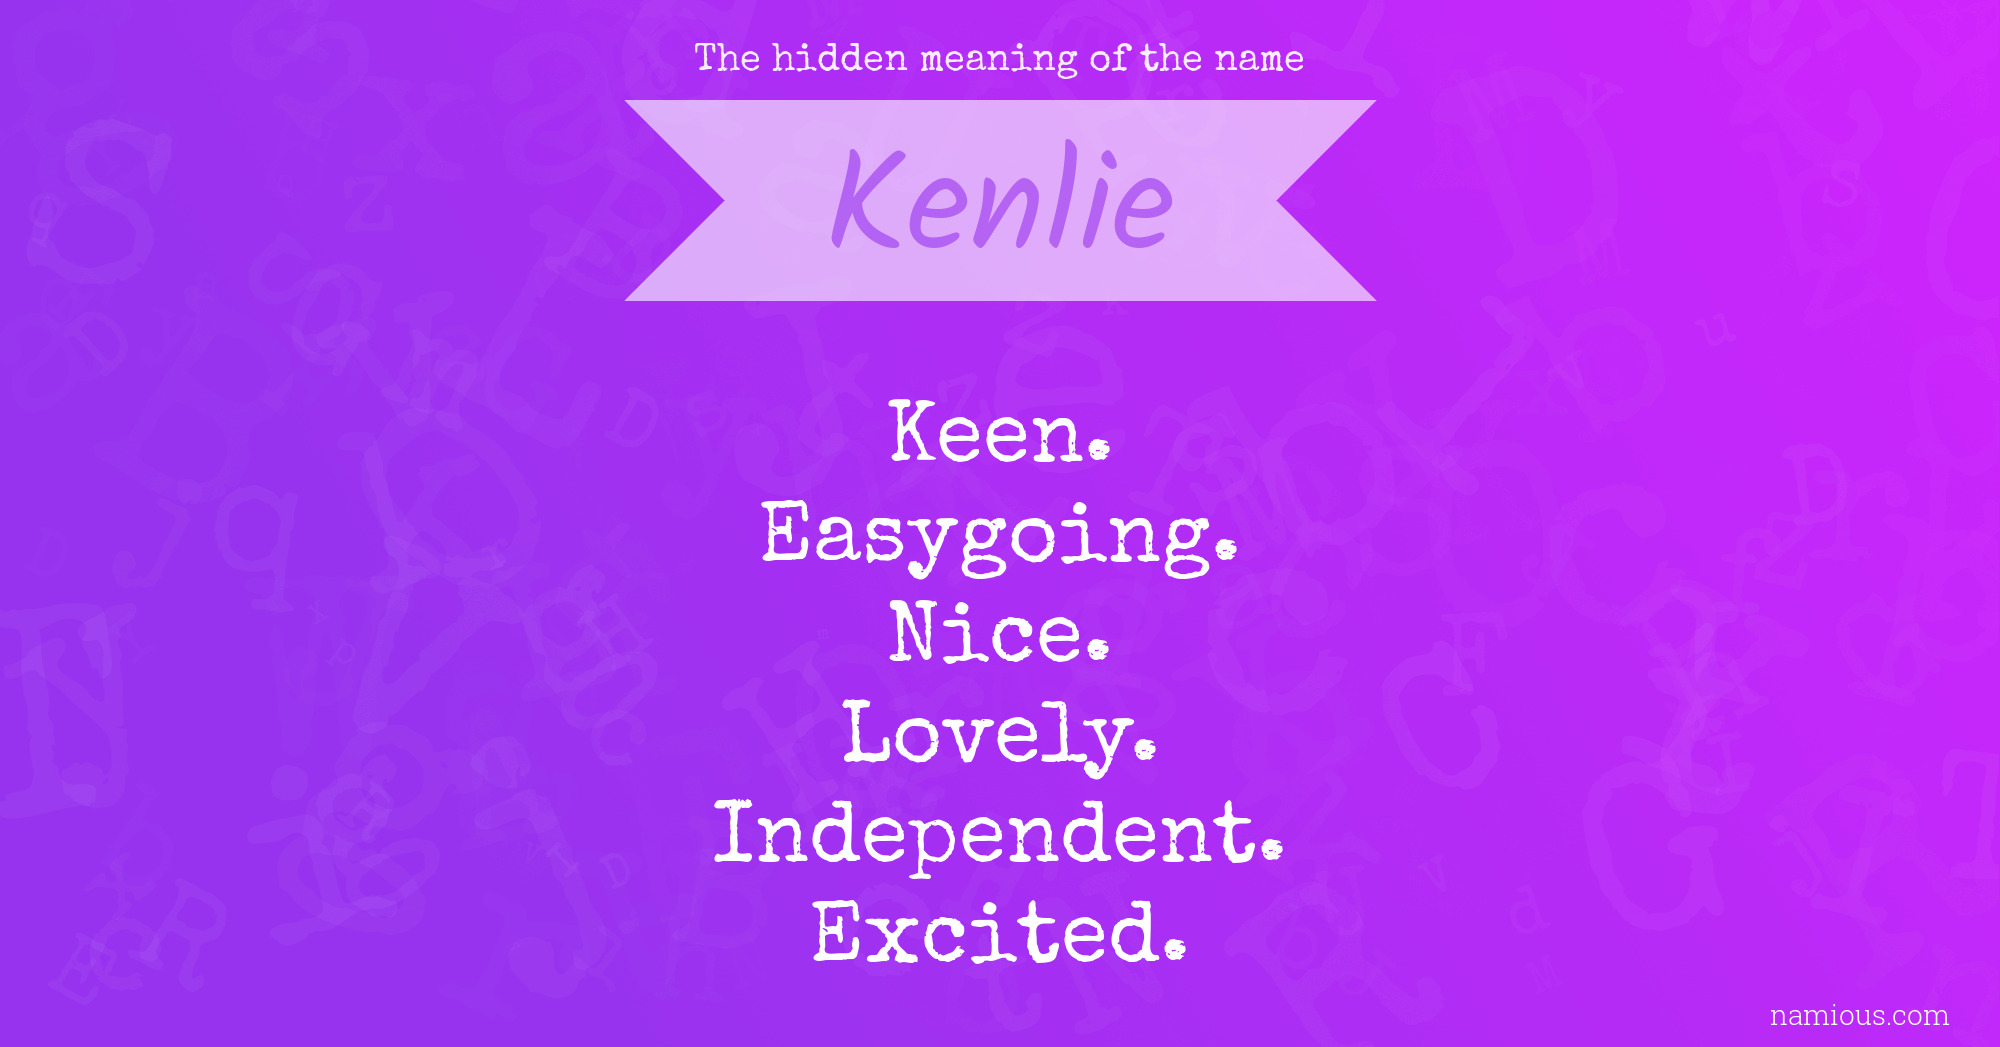 The hidden meaning of the name Kenlie